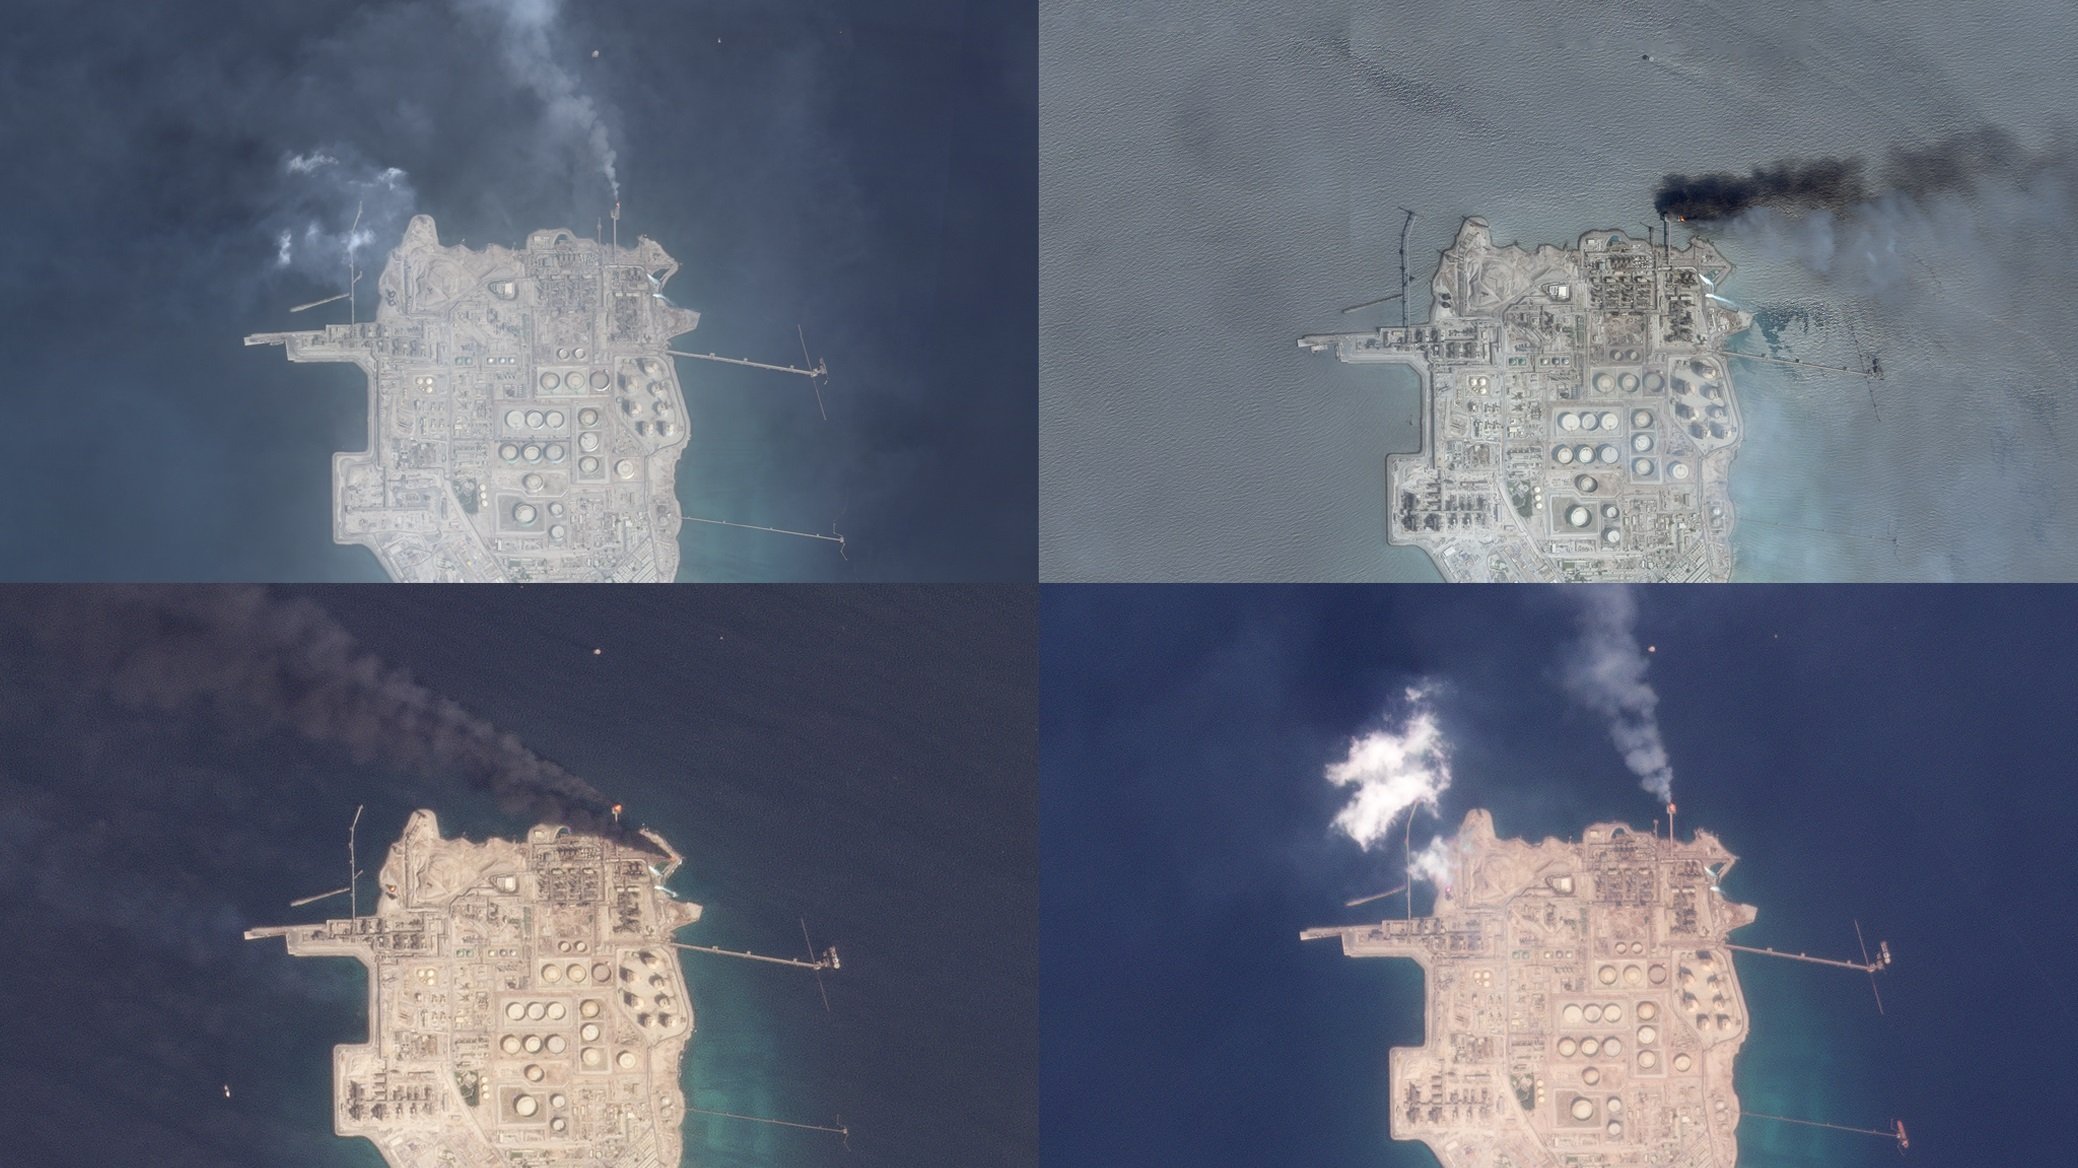 Four satellite images arranged in quadrant showing flaring at an offshore oil field